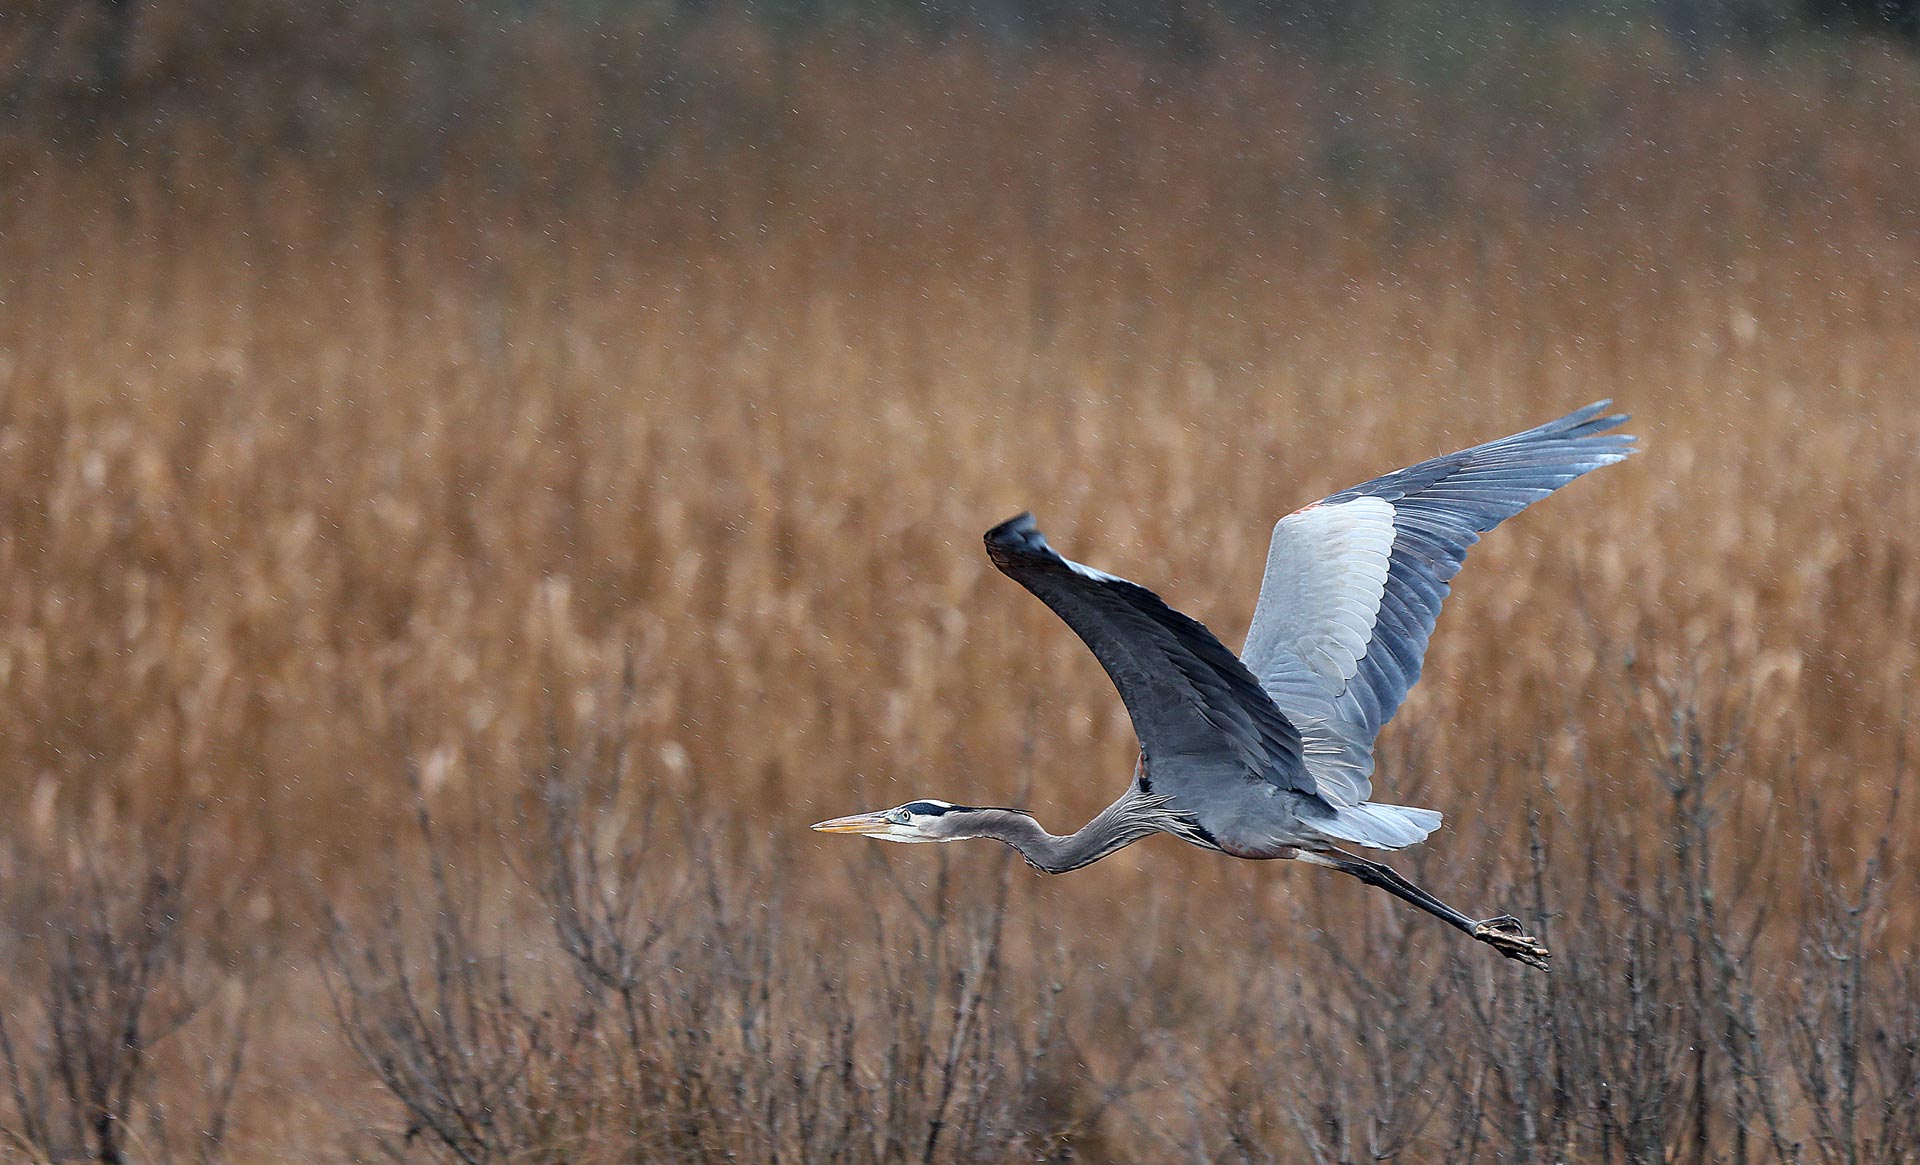 A blue heron takes flight over the march along School House Road in the Naxera section of Gloucester County Thursday February 13, 2020.